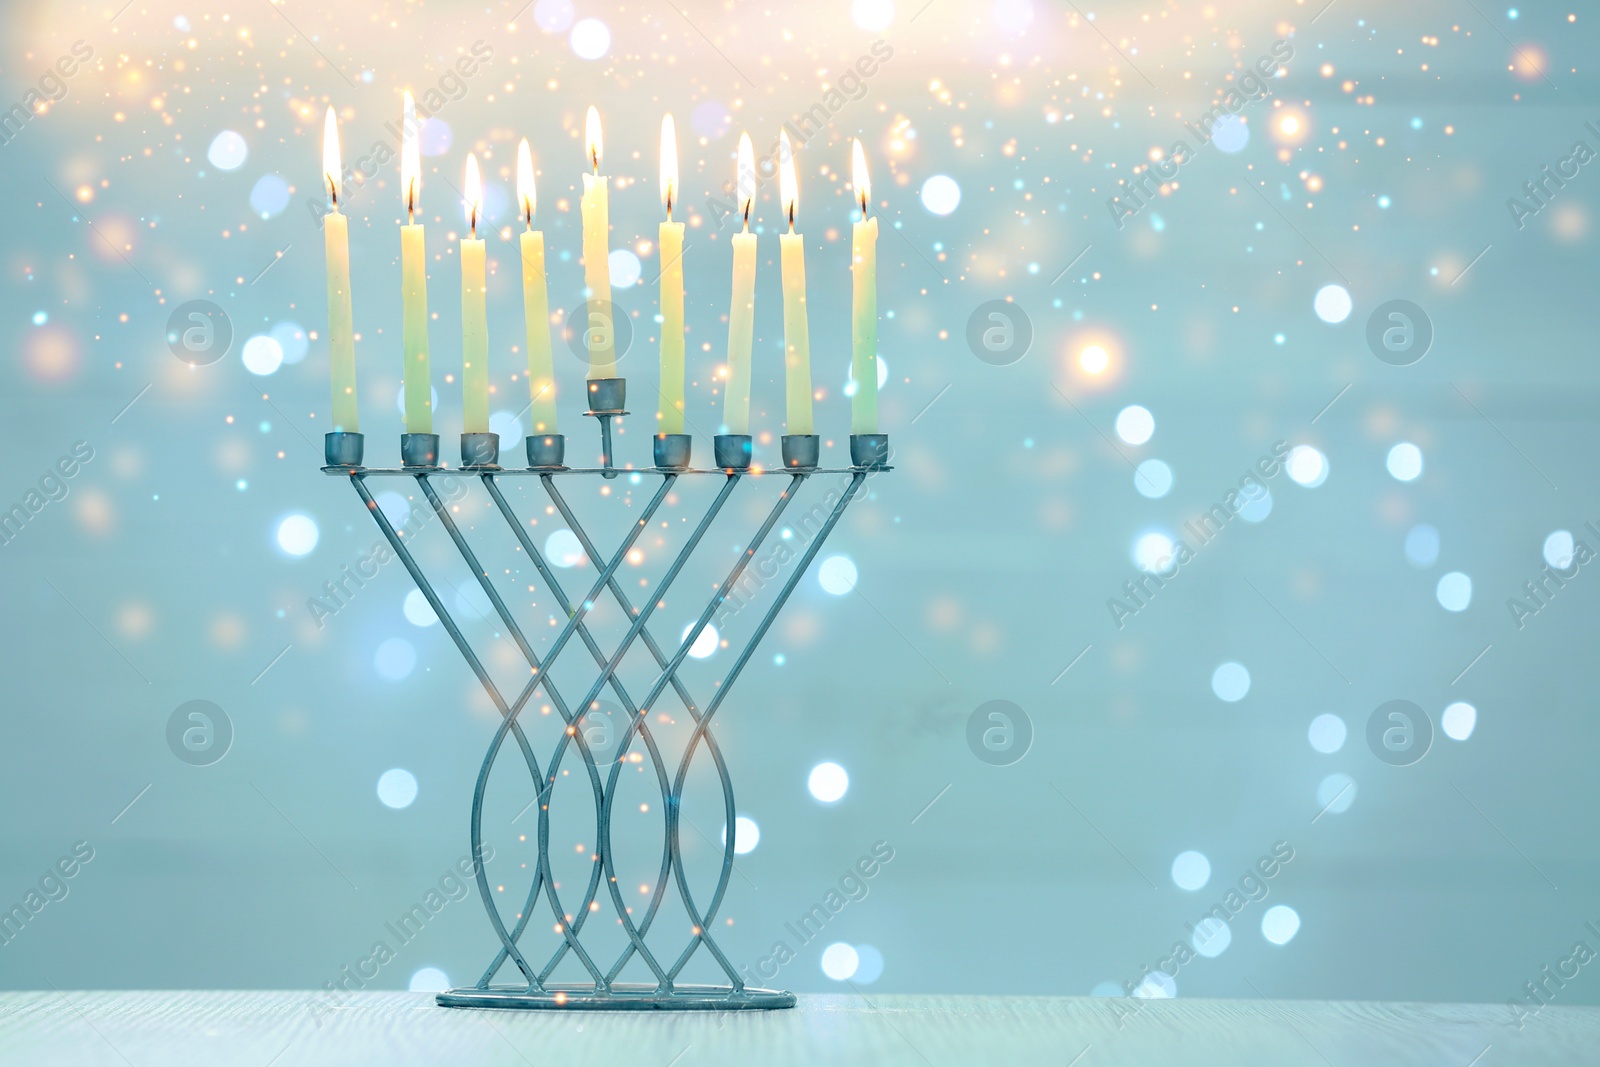 Image of Hanukkah celebration. Menorah with burning candles on table against blurred lights, space for text